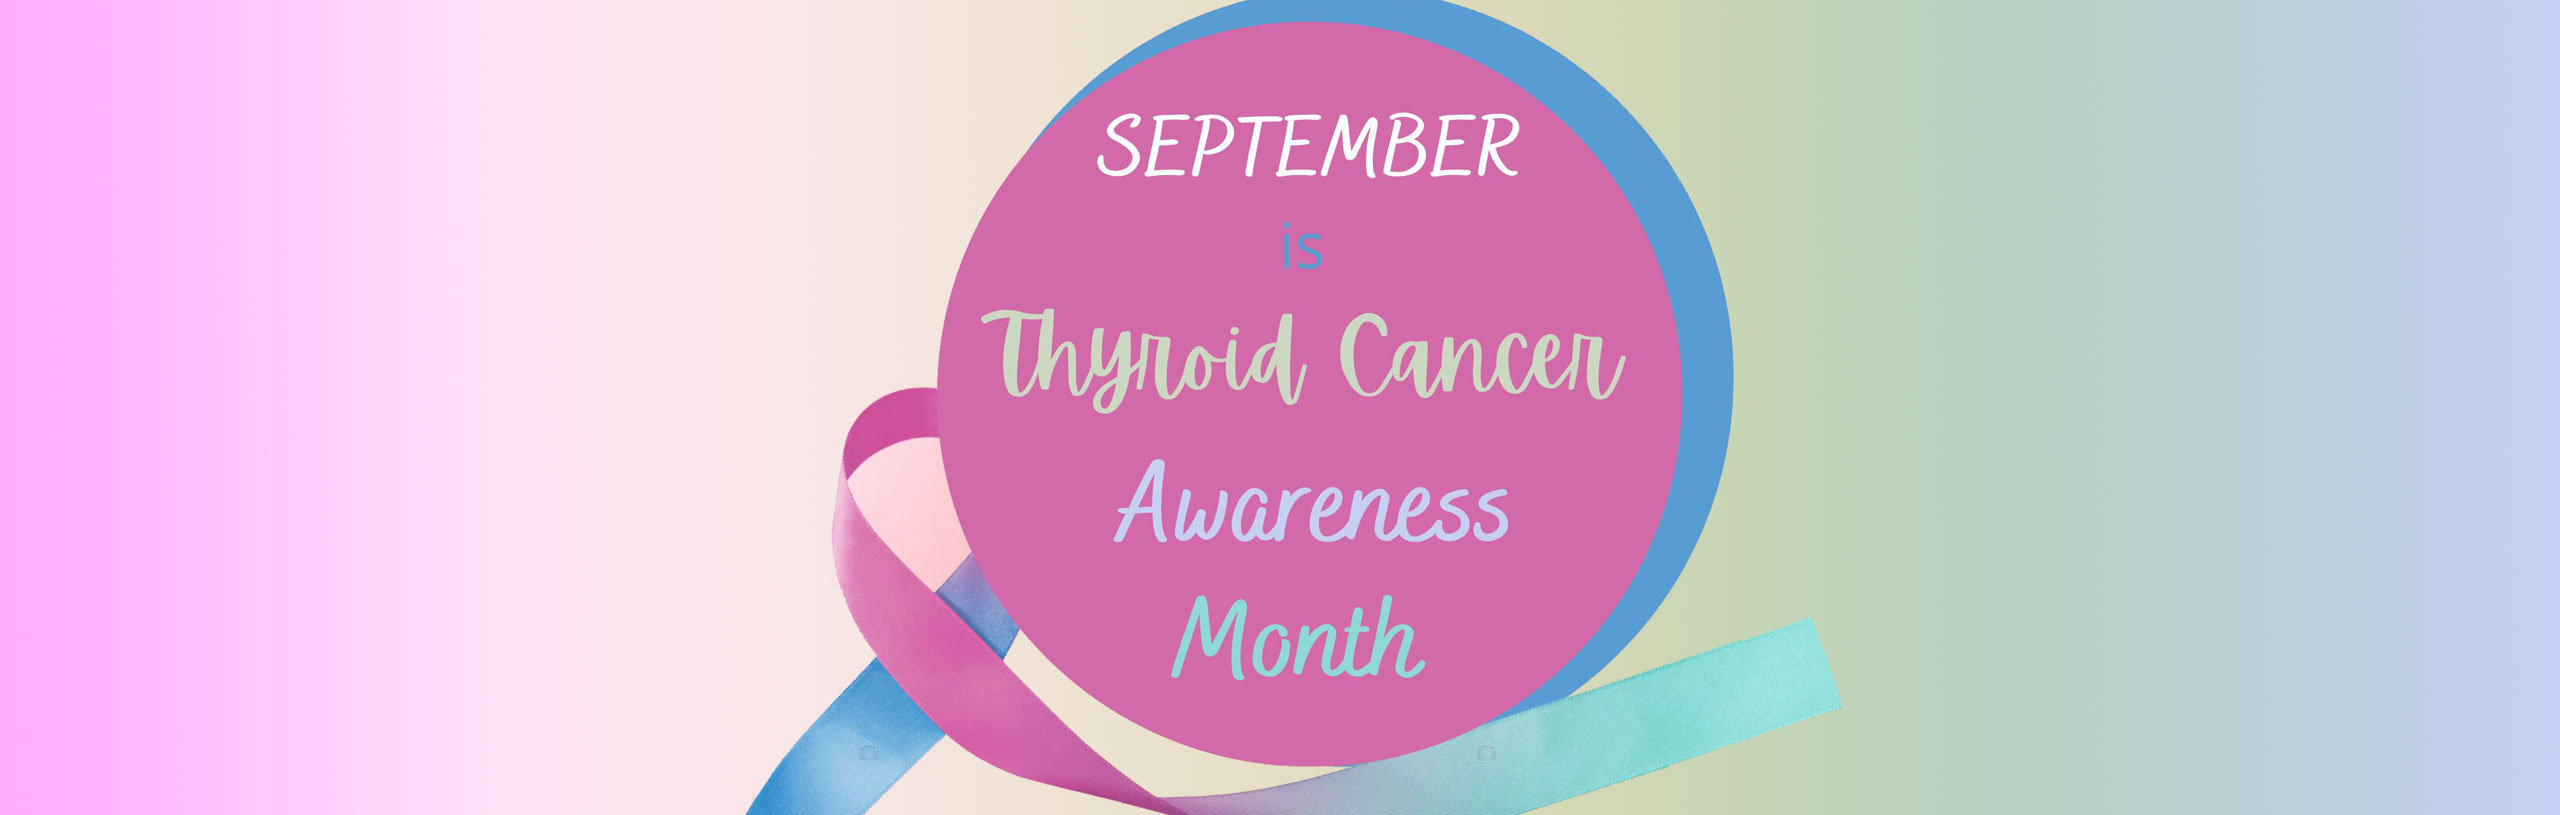 Banner of a circle with ribbon around it. Banner says:

SEPTEMBER is Thyroid Cancer Awareness Month